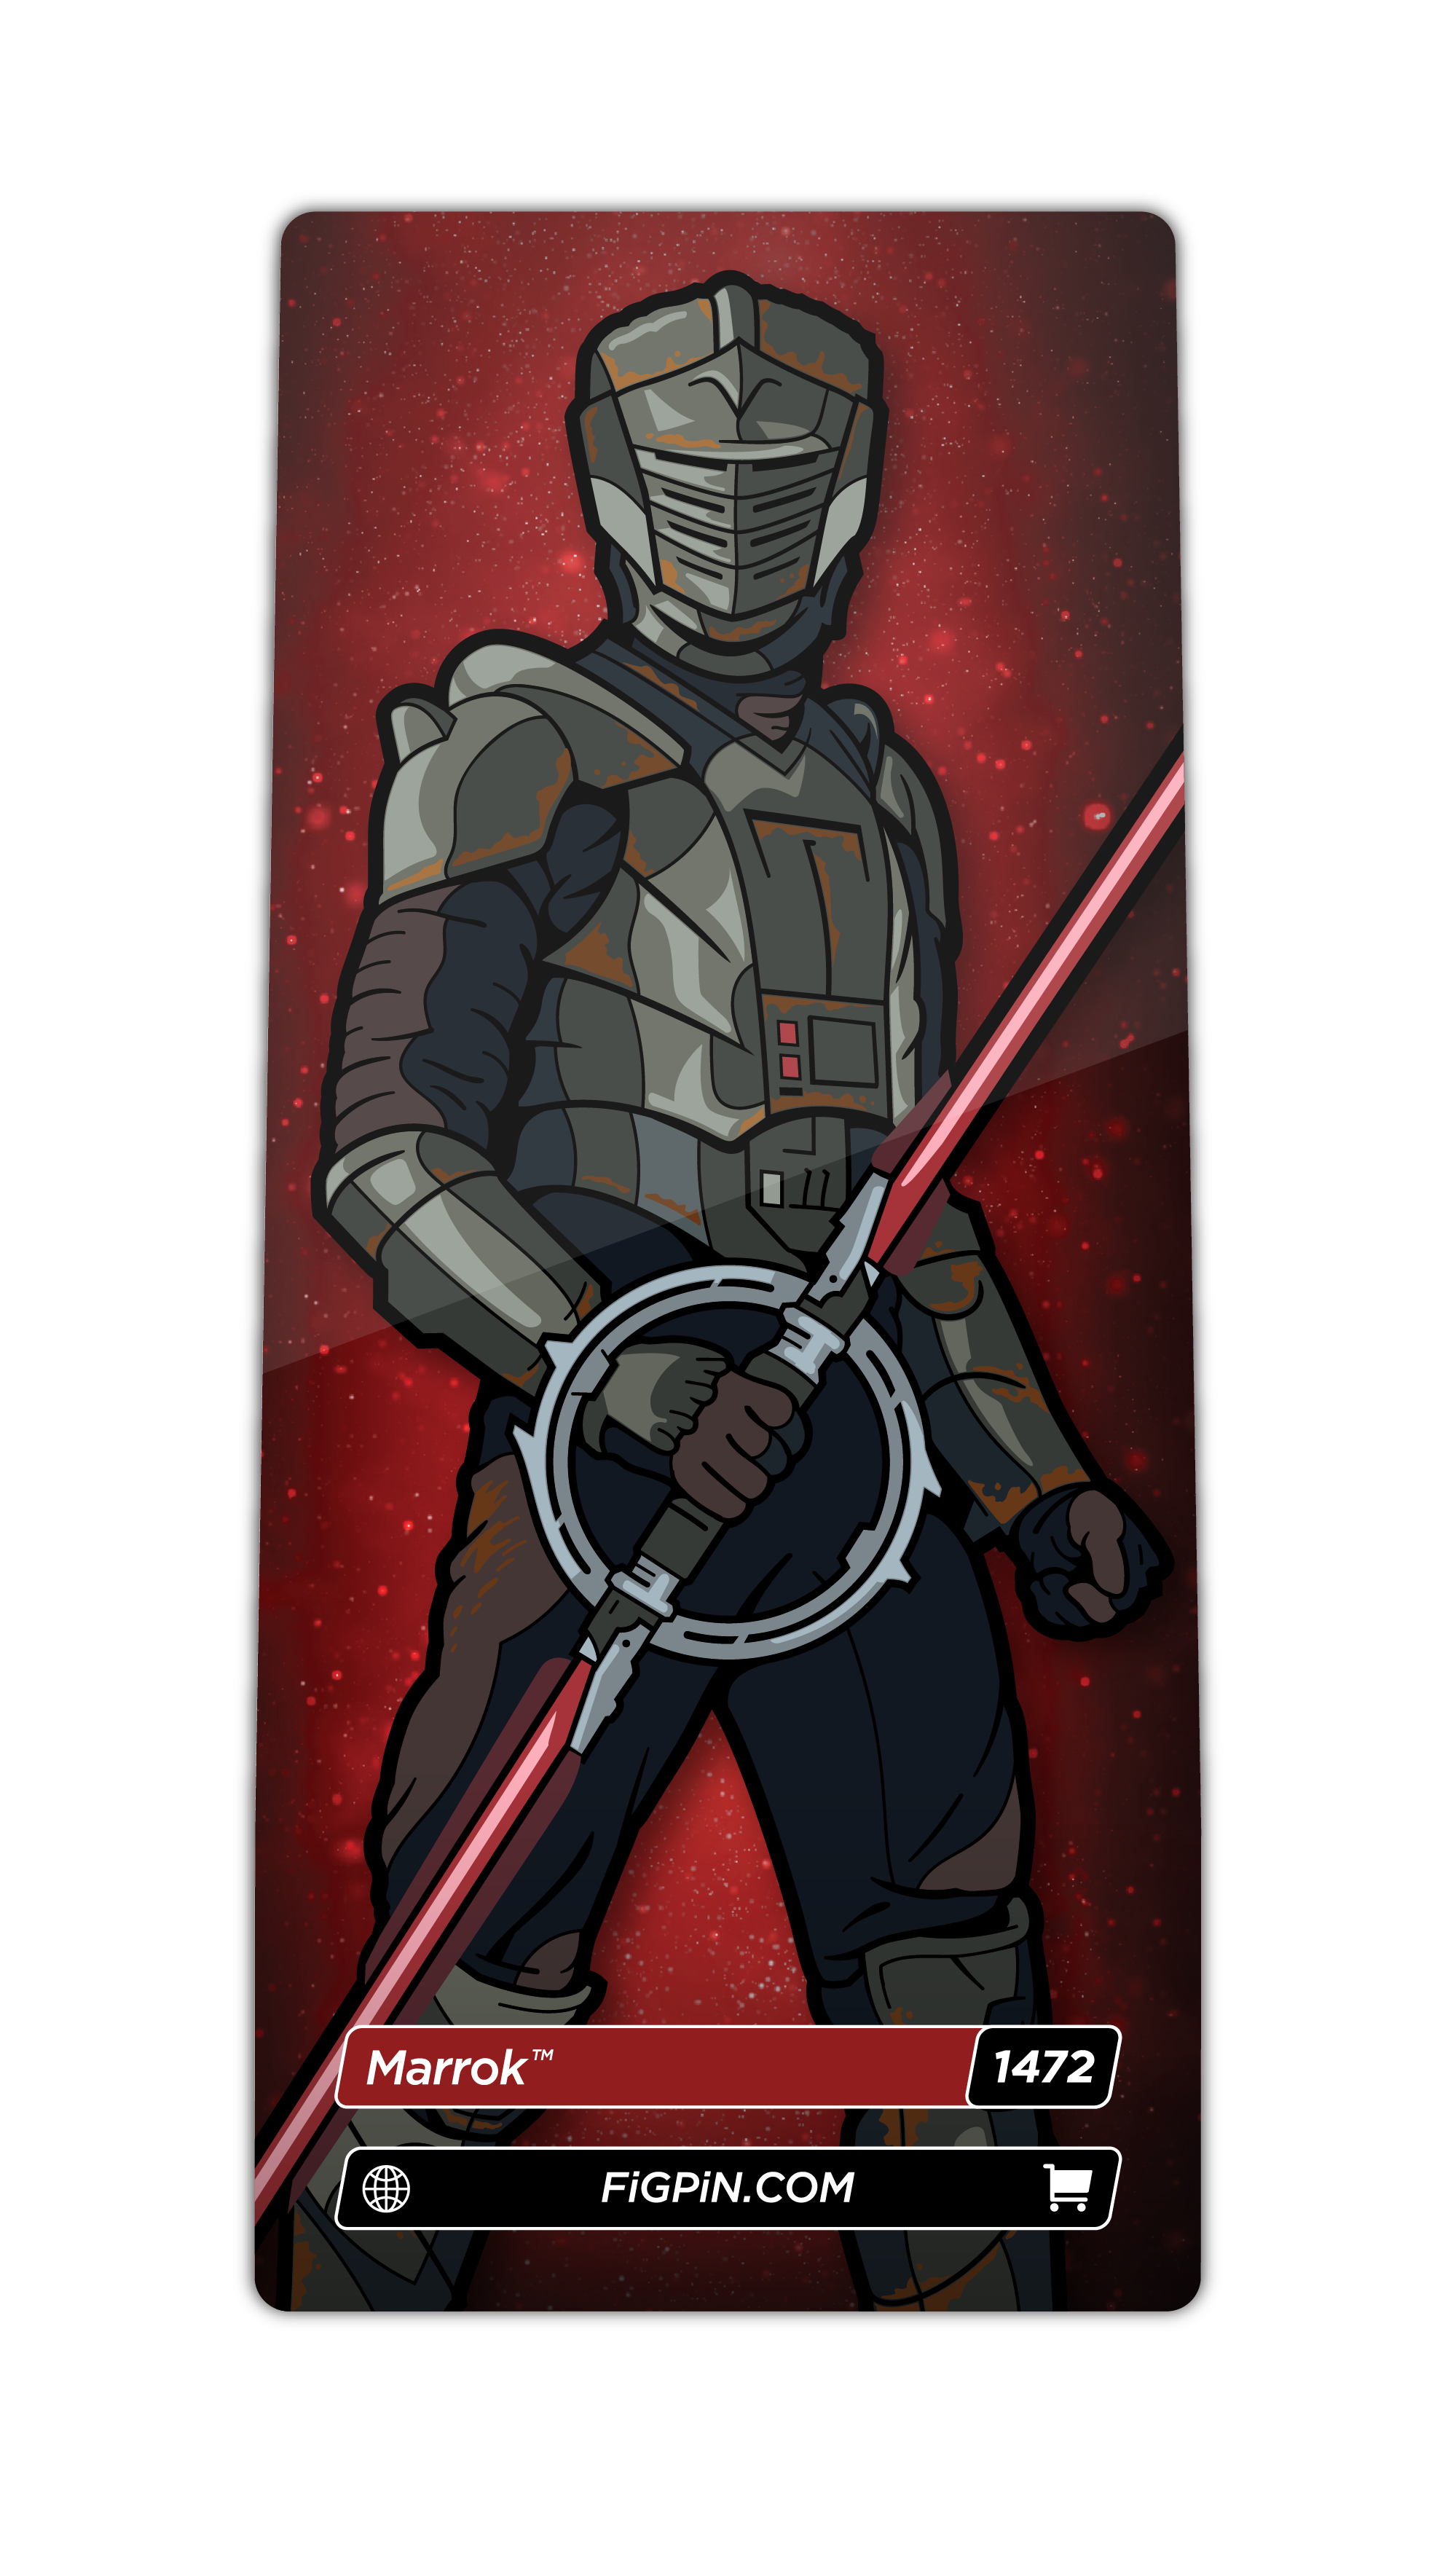 Character card of STAR WARS AHSOKA's Marrok with text “Marrok (1472)” and link to FiGPiN’s website